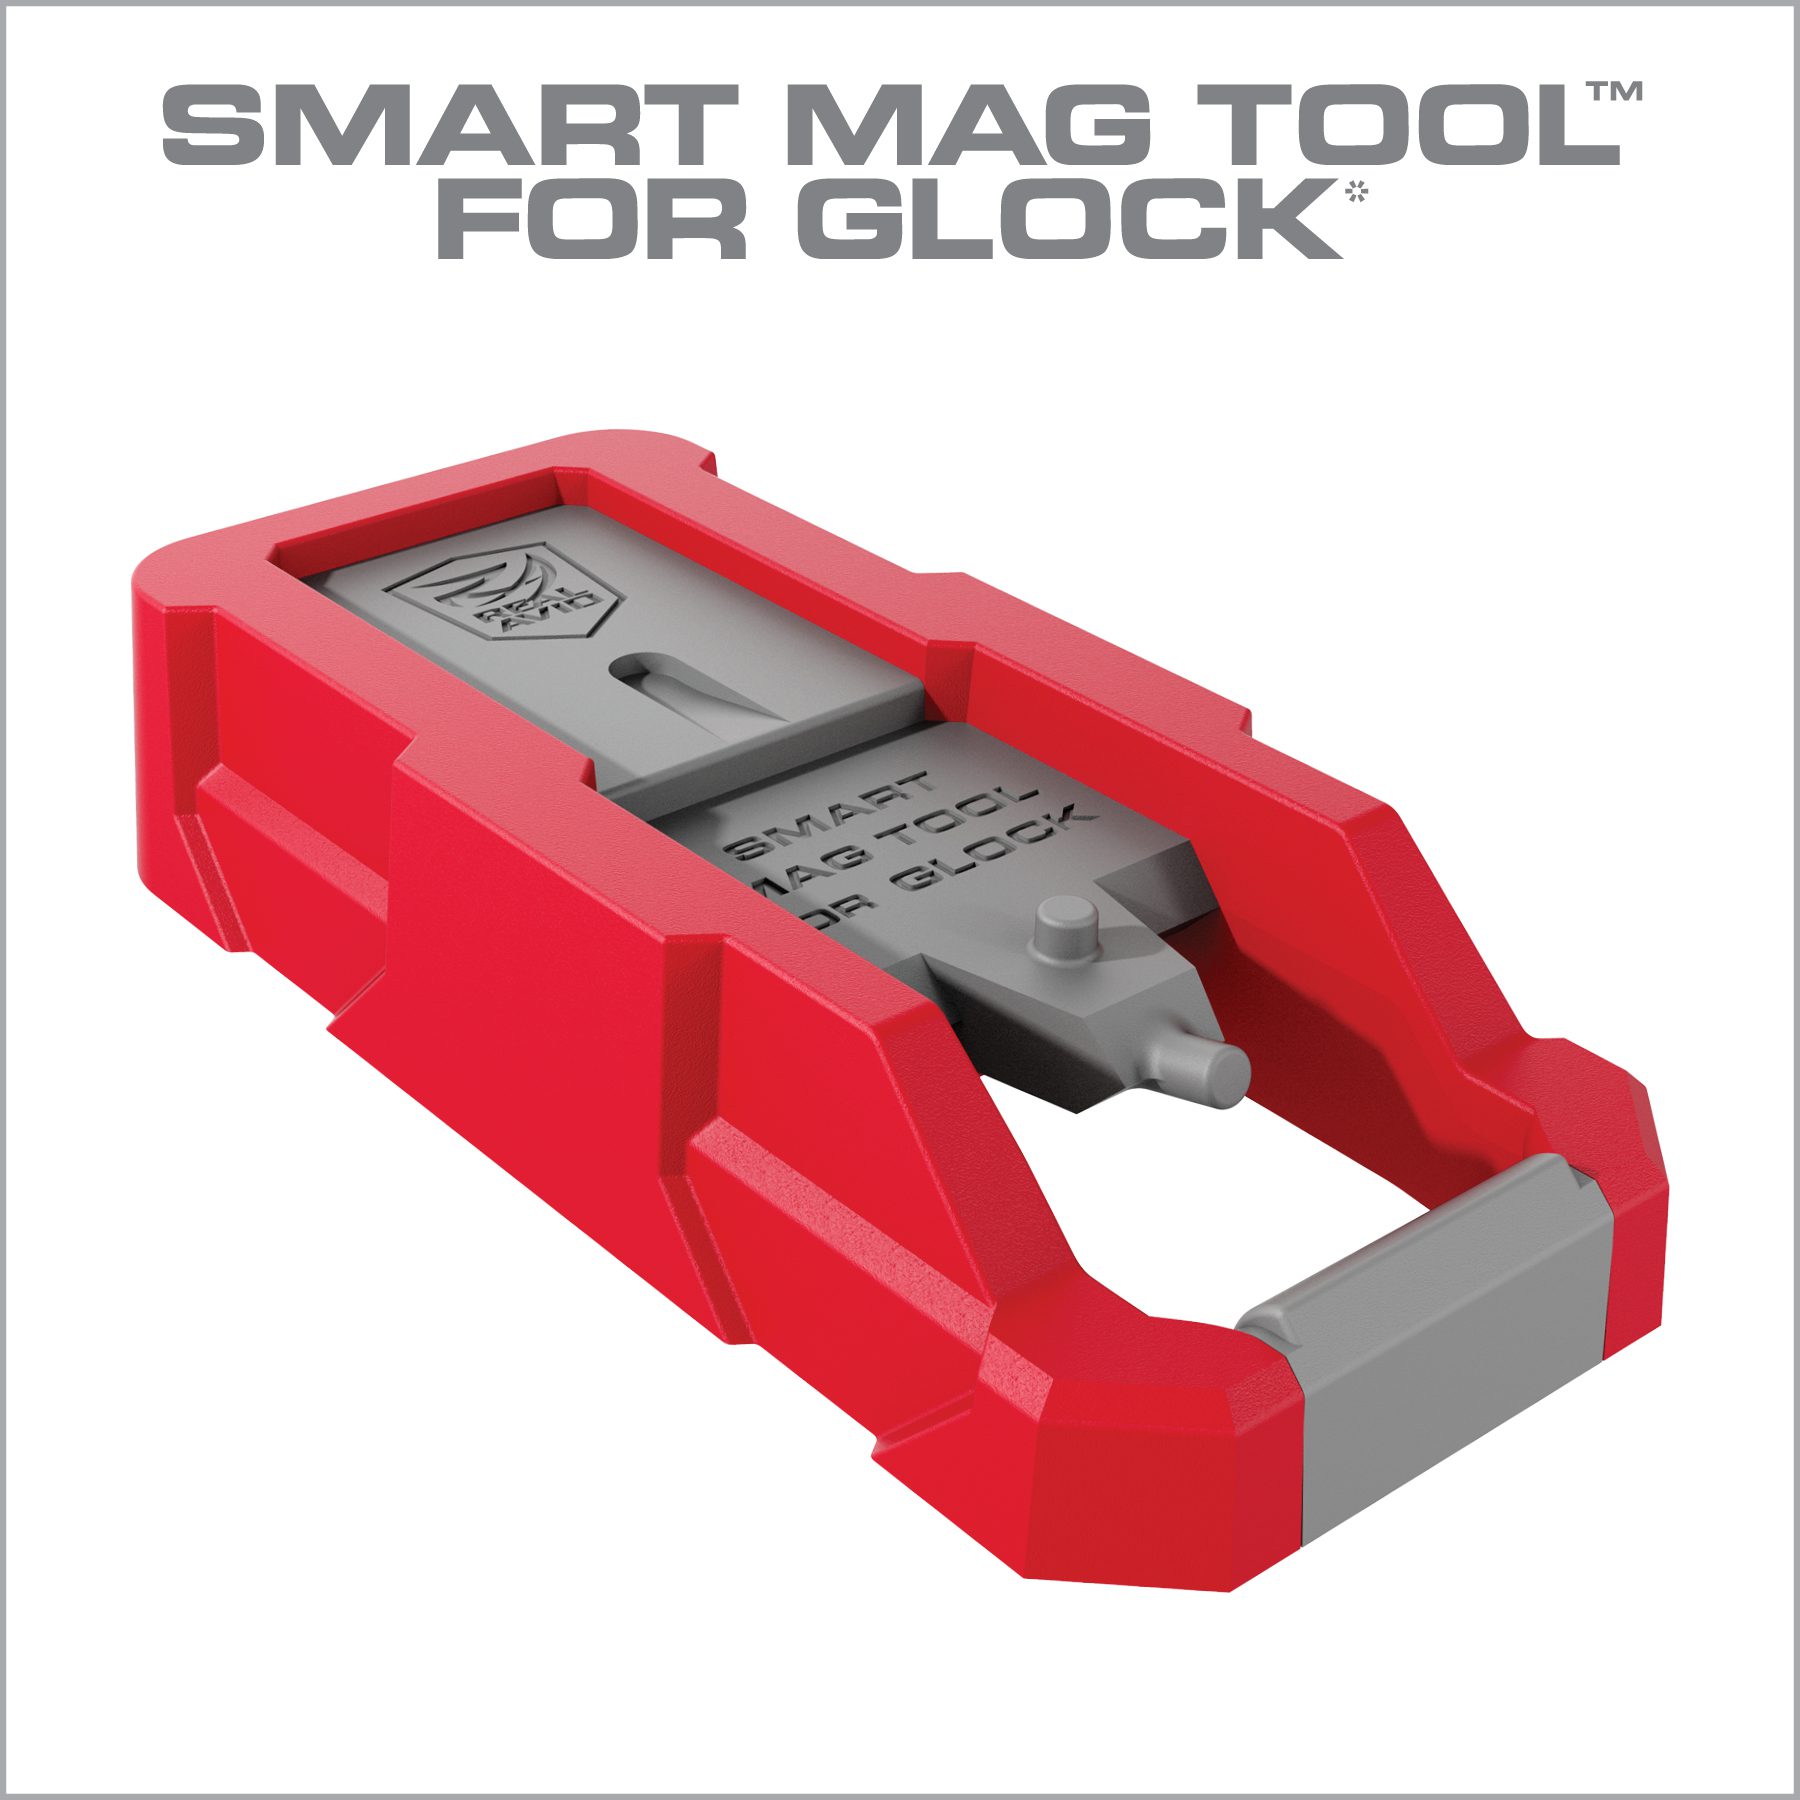 the smart mag tool for glock